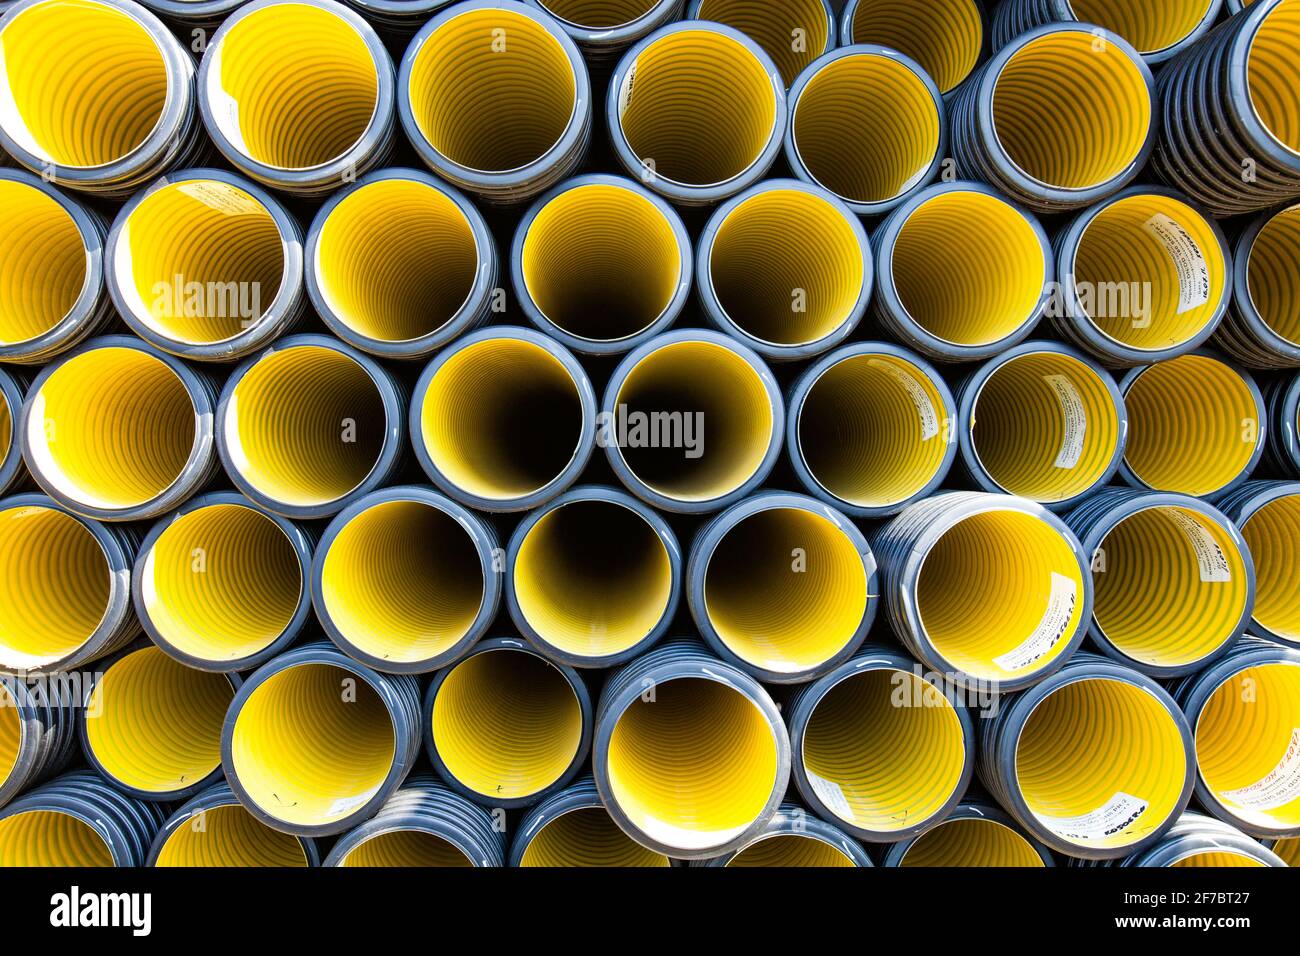 Plastic pipes production plant warehouse. Yellow PVC channelled pipes. Stock Photo